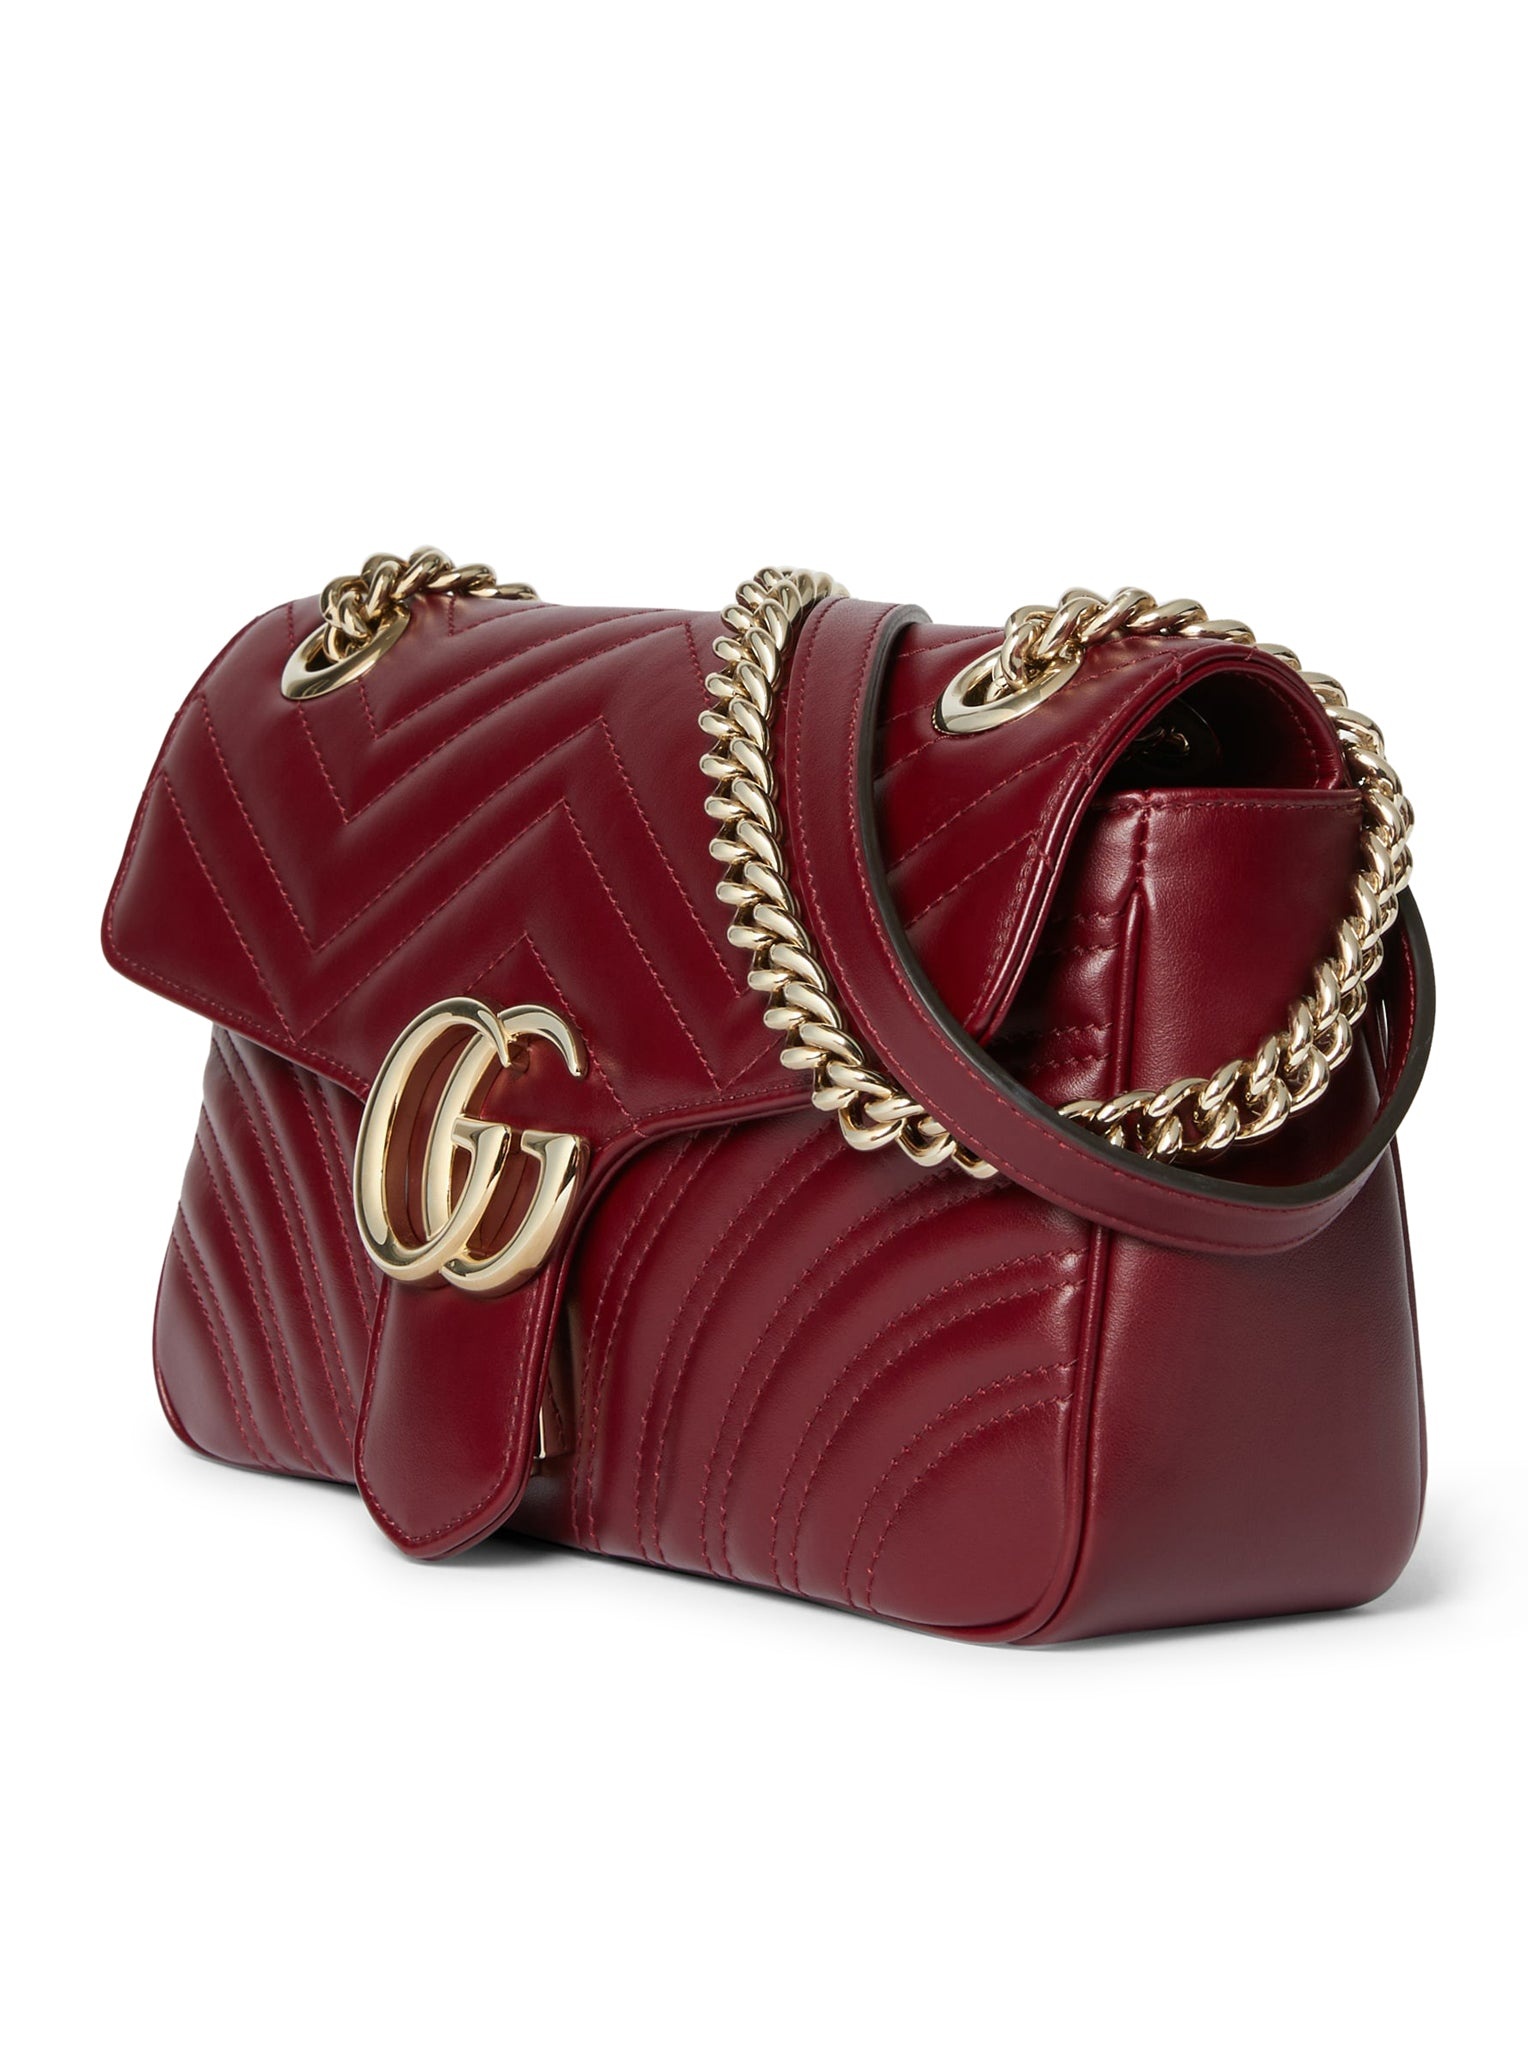 GG MARMONT SMALL SHOULDER BAG - 4